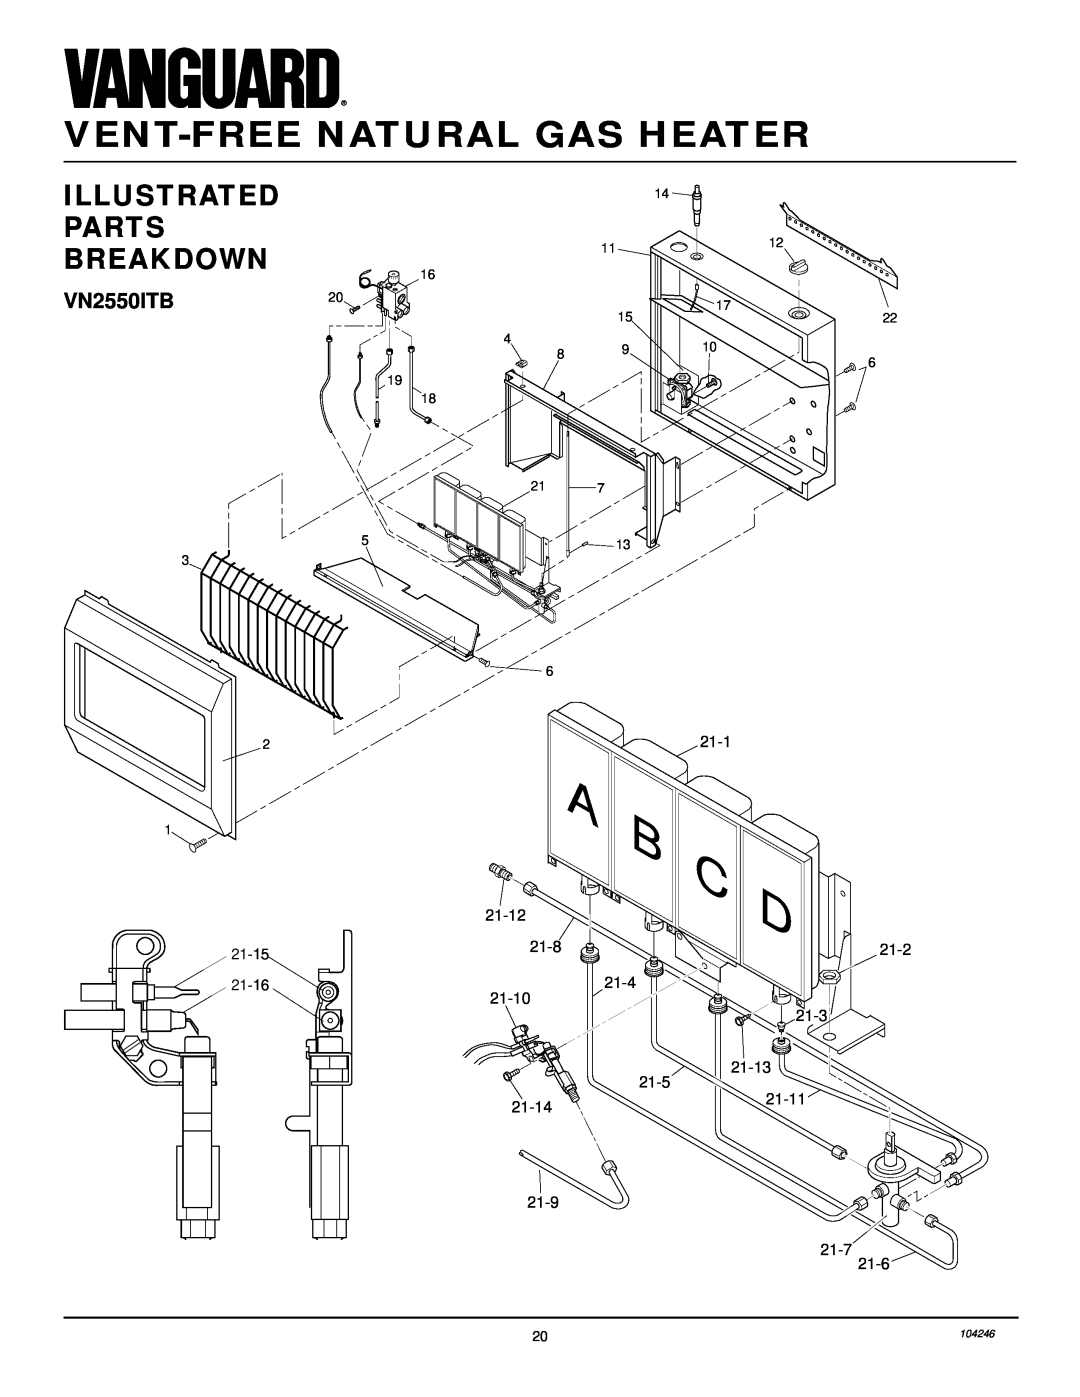 Vanguard Heating VN2550ITB, VN1800ITB Vent-Freenatural Gas Heater, Illustrated Parts Breakdown, 14 11 15 4, 104246 